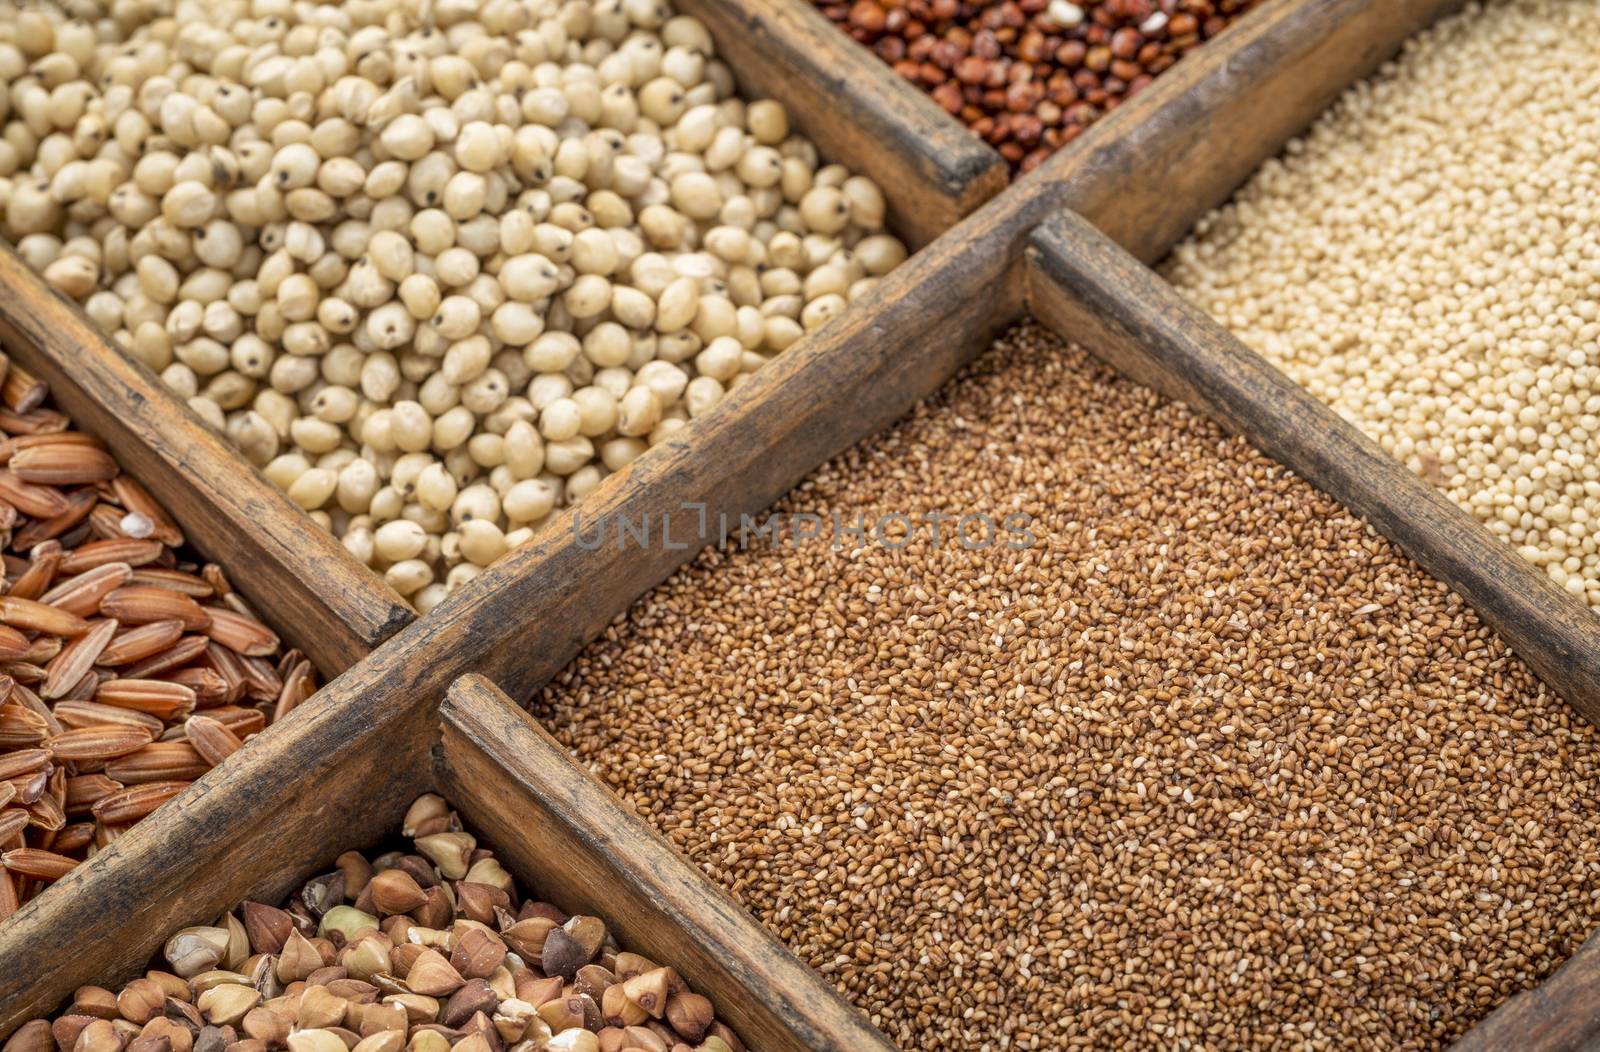 teff and other gluten free grains by PixelsAway